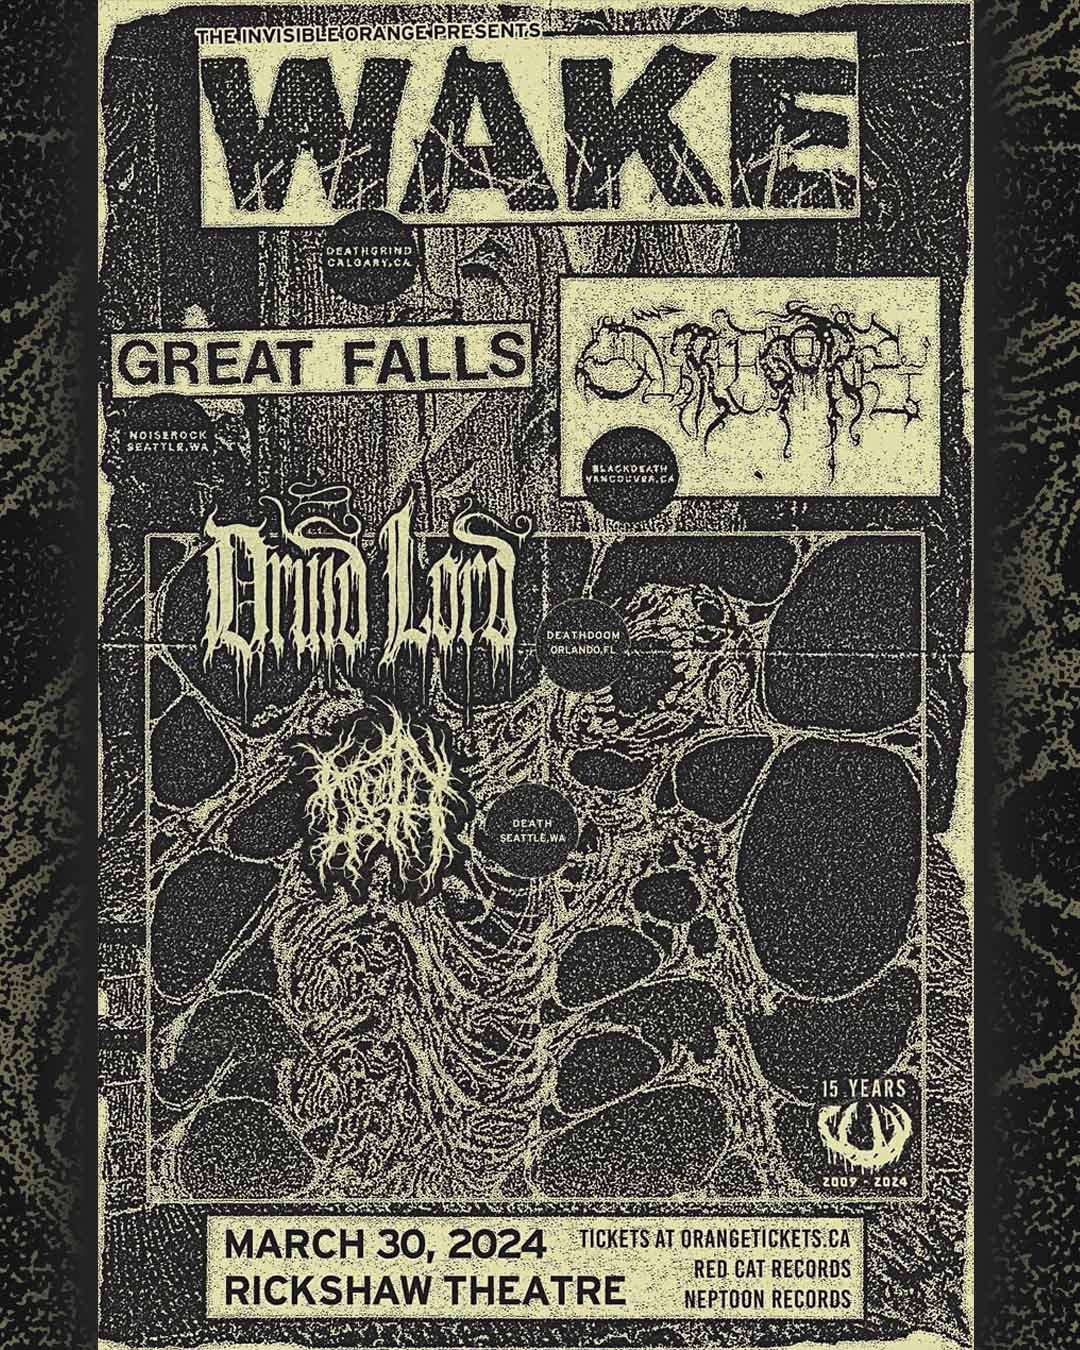 WAKE // GREAT FALLS // EGREGORE // DRUID LORD // NOROTH